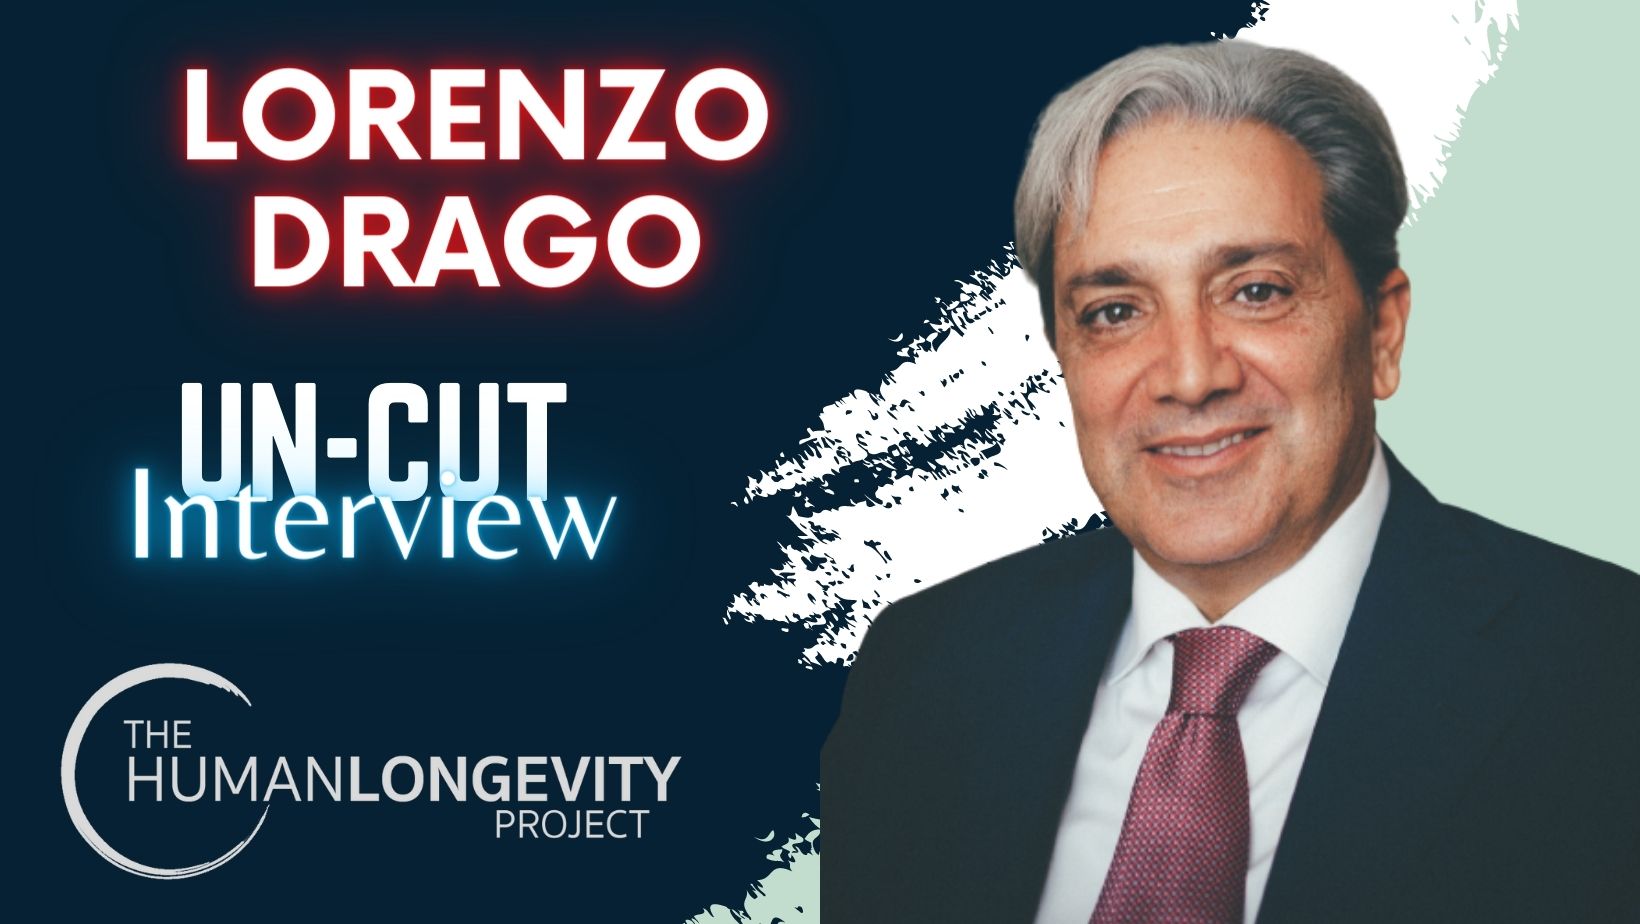 Human Longevity Project Uncut Interview With Dr. Lorenzo Drago